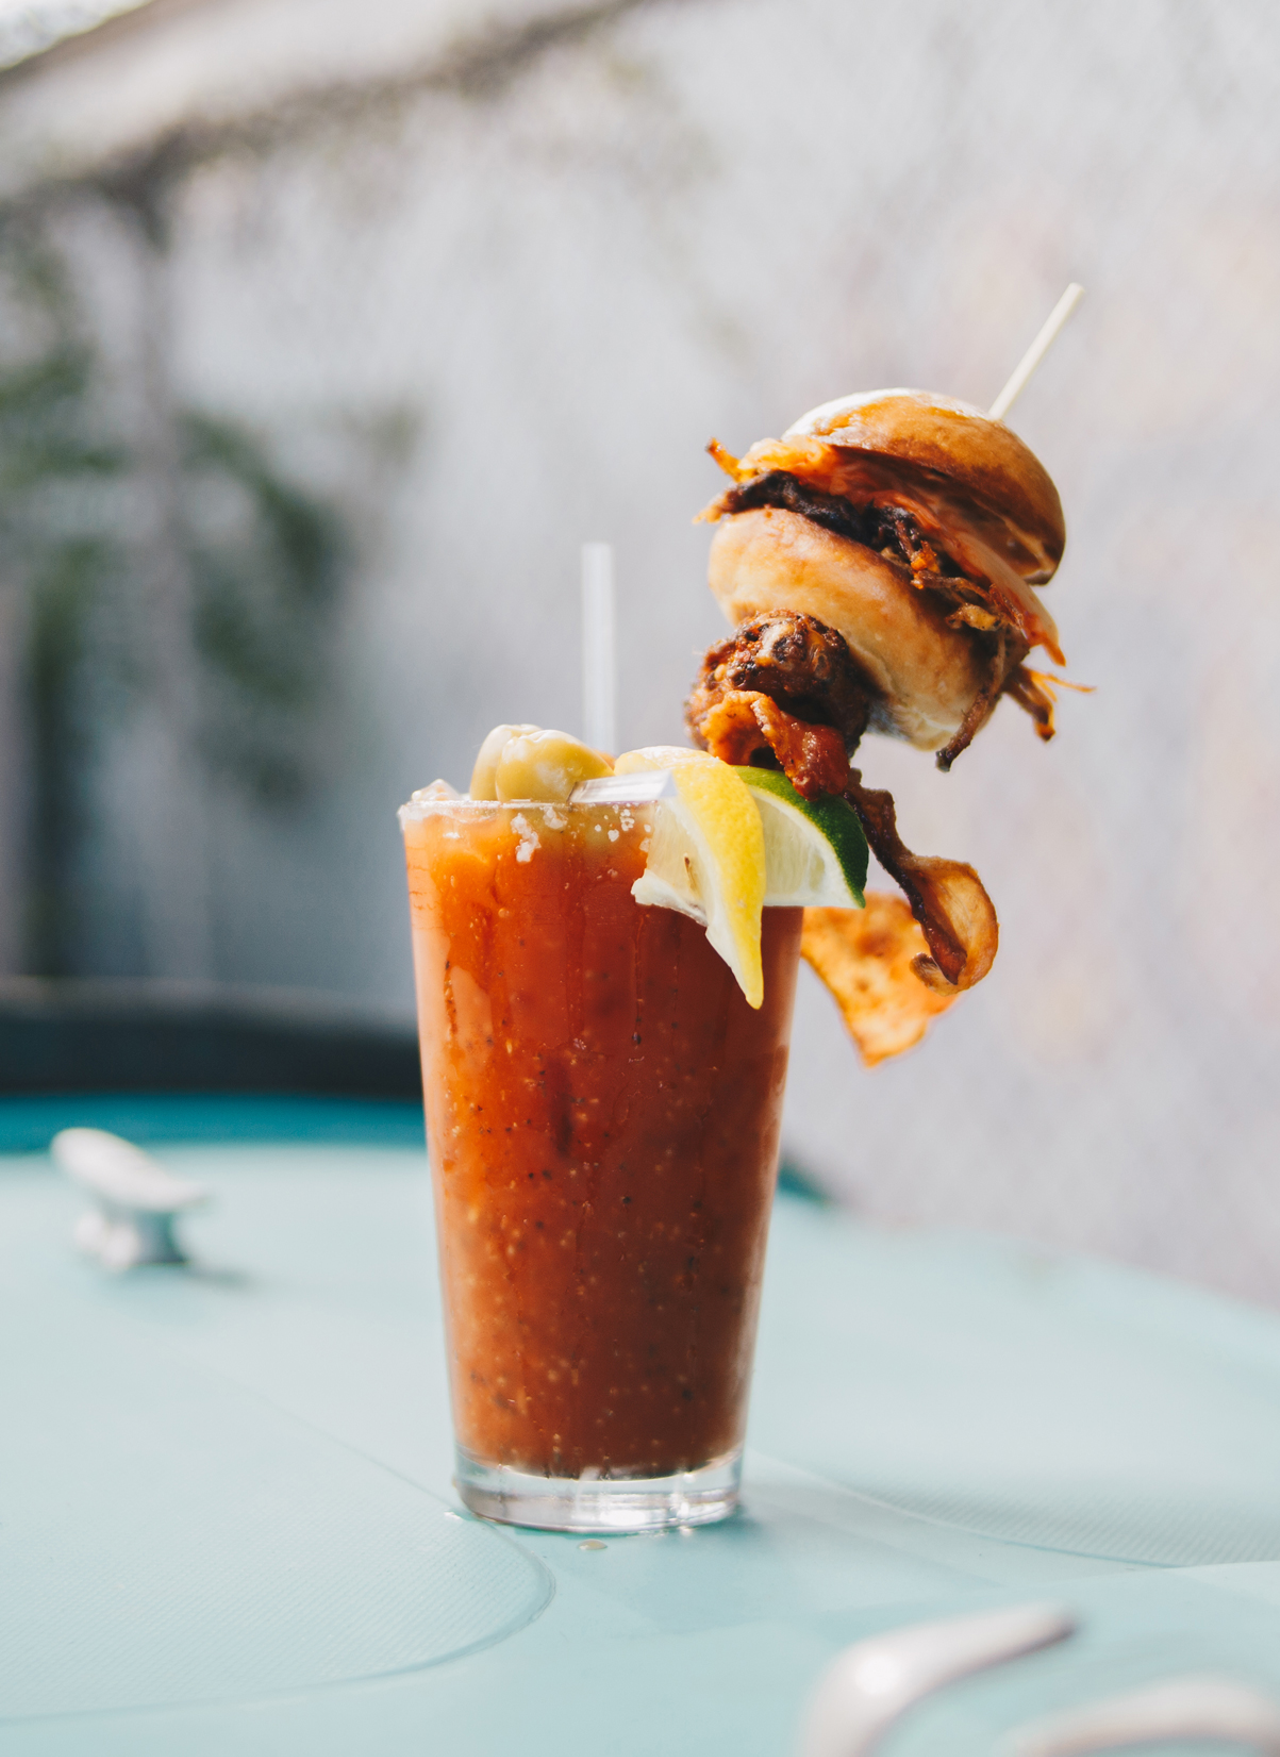 Northside Yacht Club // Brunch: 11 a.m.-3 p.m. Sunday. It’s never too early for Punk Rock brunch at Northside Yacht Club — as long as it’s after 11 a.m.  If you decide on their bloody mary, know it contains enough food to count as an entrée to some appetites, including a pulled pork sandwich, bacon, a chicken wing and — oh, yeah — celery.